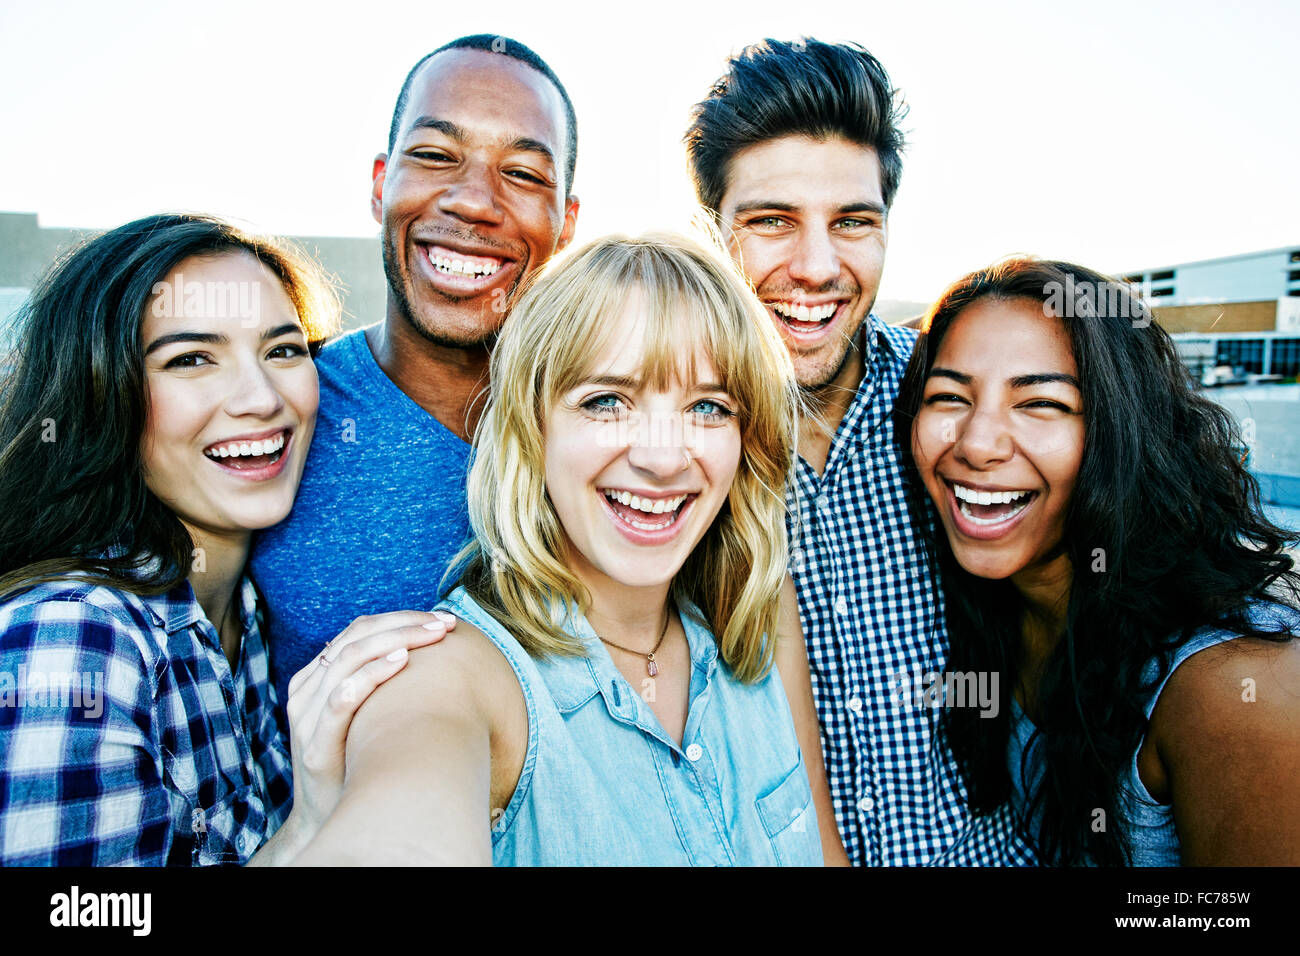 Friends posing for selfie outdoors Stock Photo